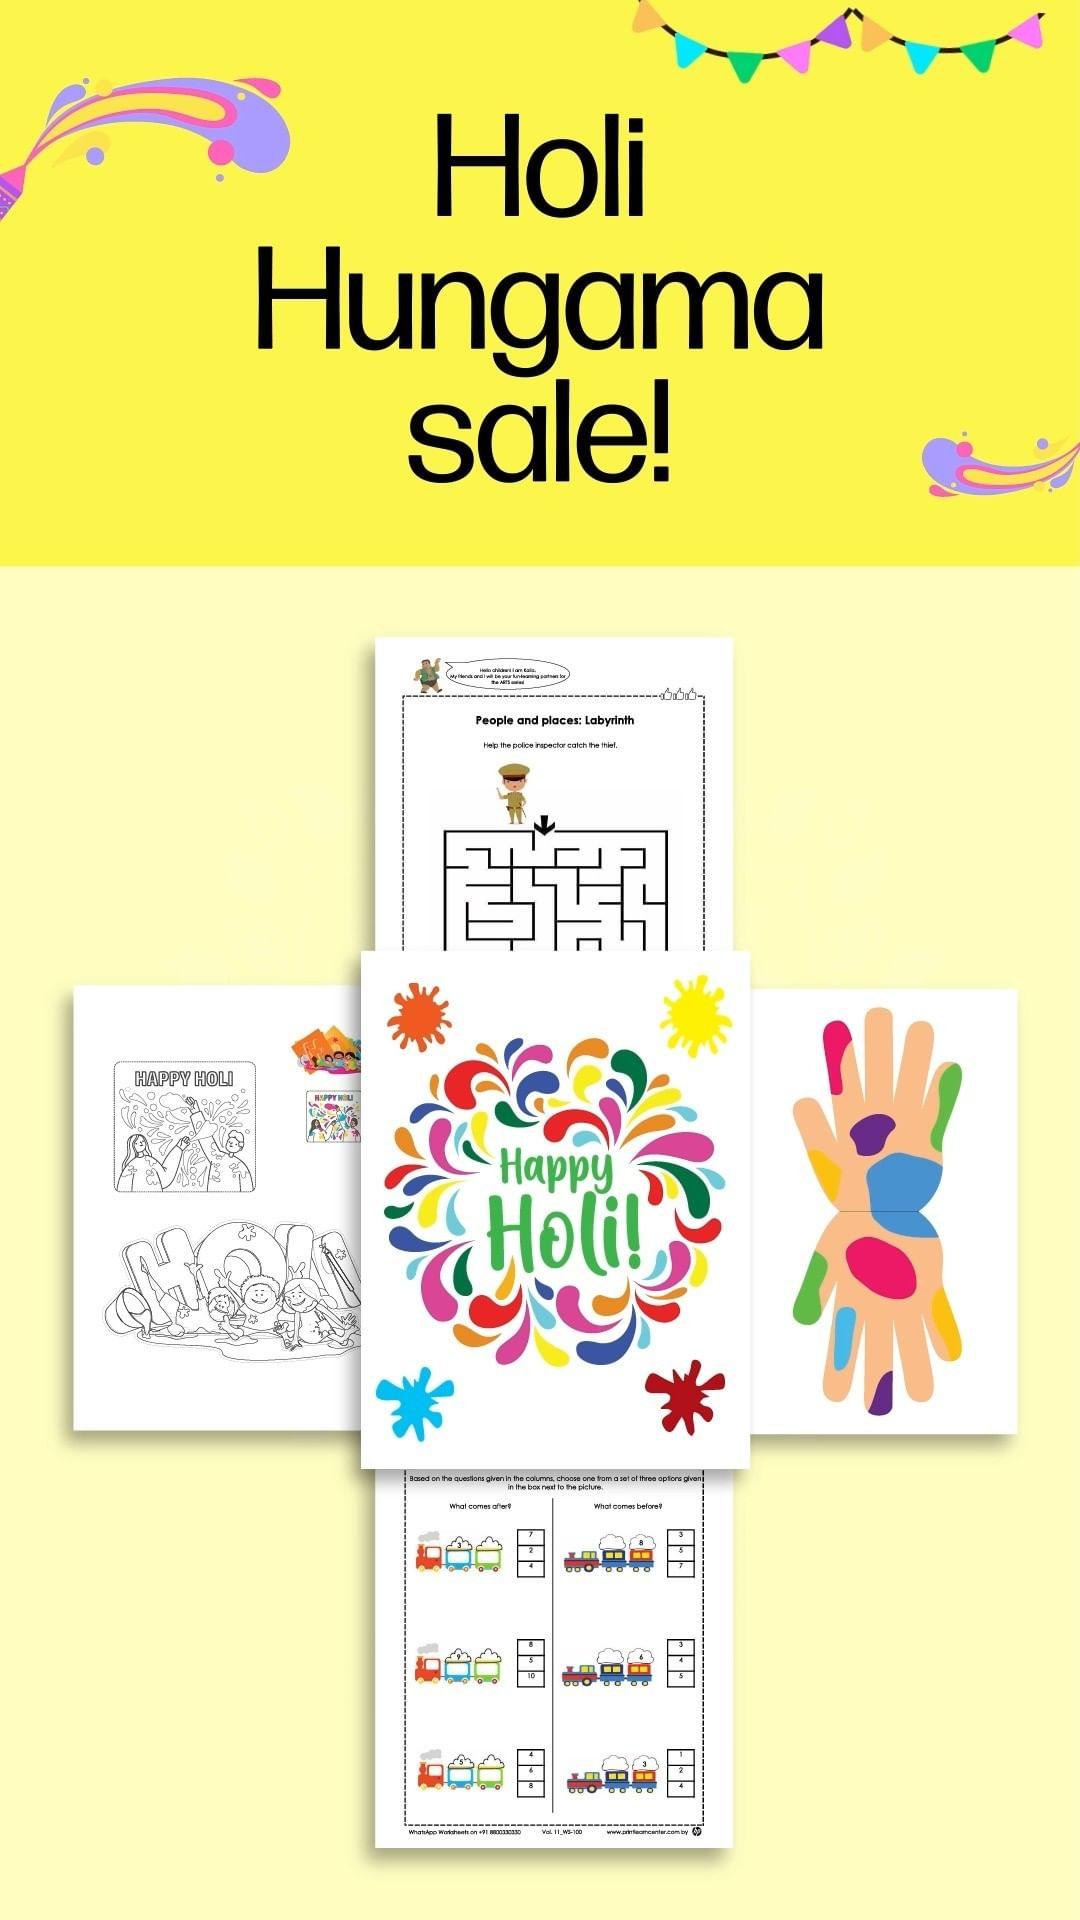 class="content__text"
 Keep the Holi spirit alive with our Holi Hungama Sale! Get 3500+ printable learning worksheets for just Rs. 199 and let your child learn and grow while having fun. The offer is valid from March 3rd to March 13th. Click the link below and subscribe now! http://bit.ly/41J7kUI 
 